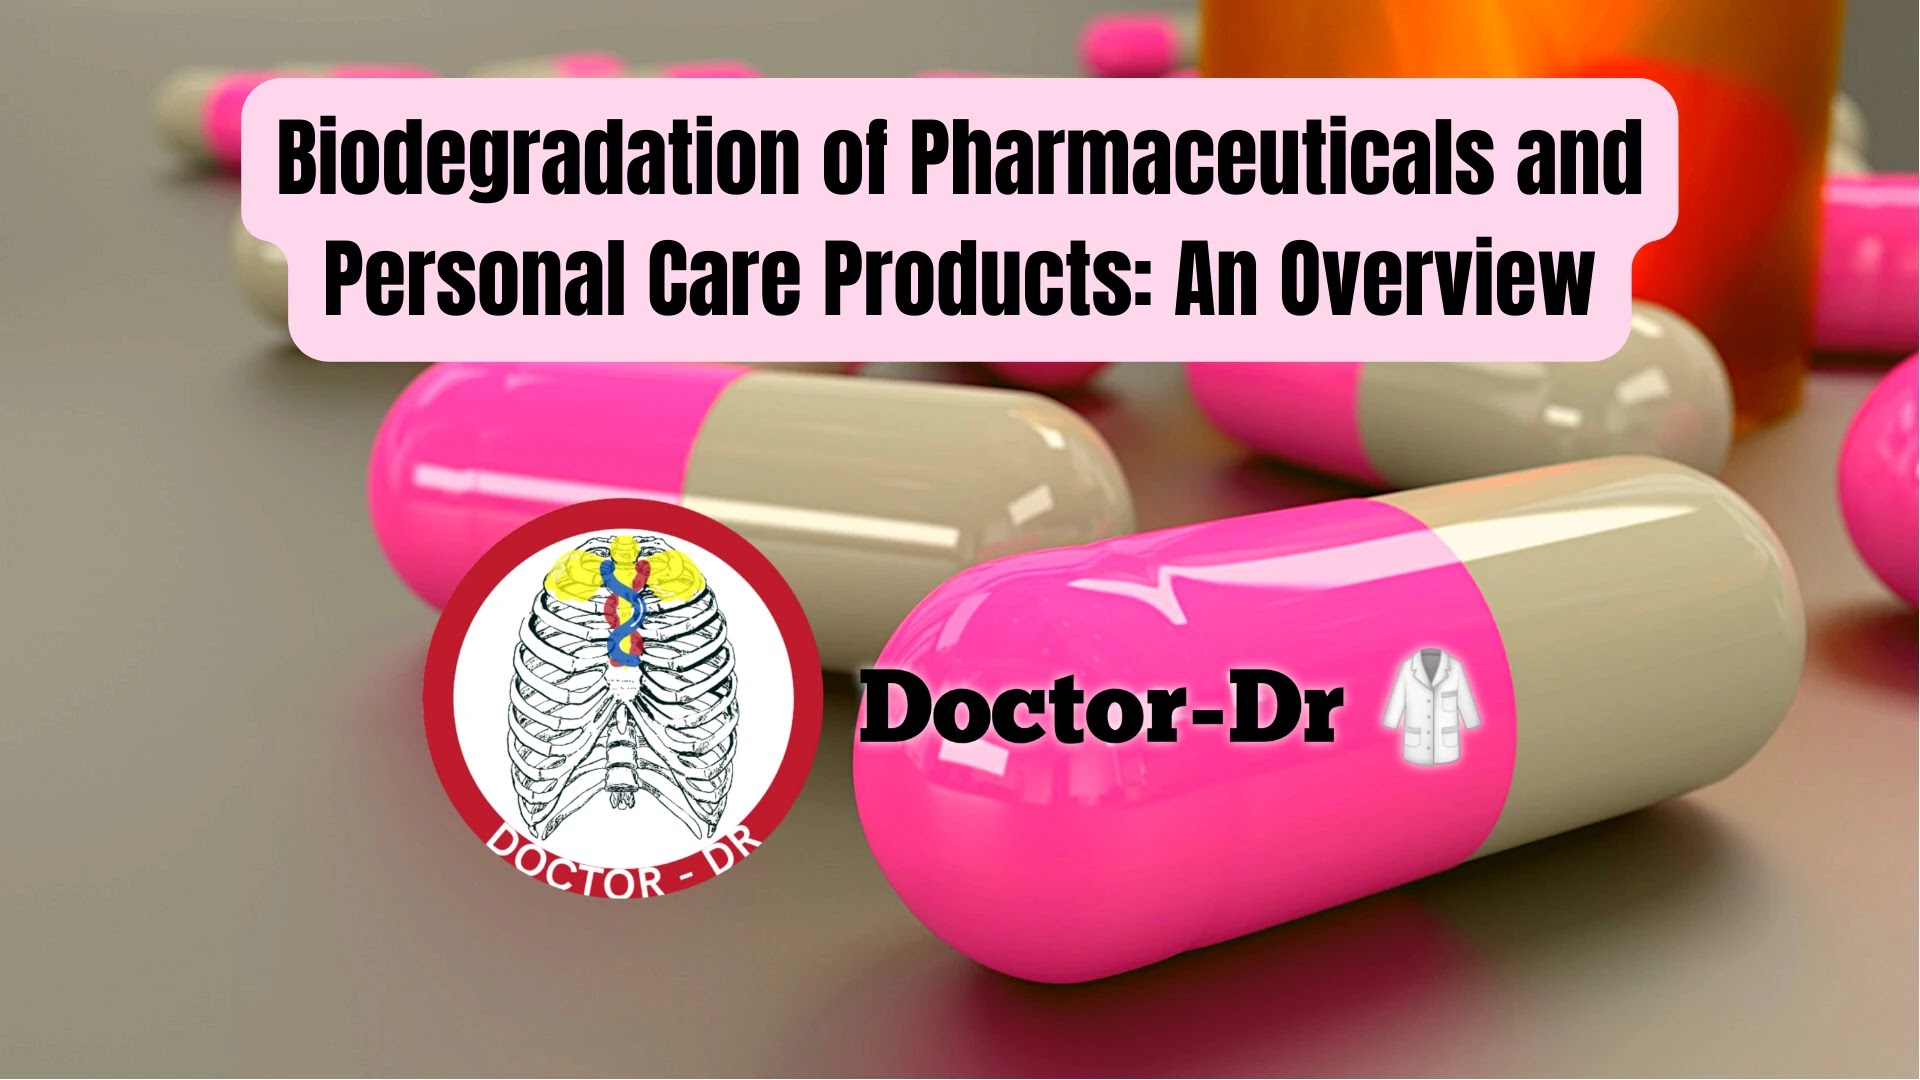 Biodegradation of Pharmaceuticals and Personal Care Products: An Overview